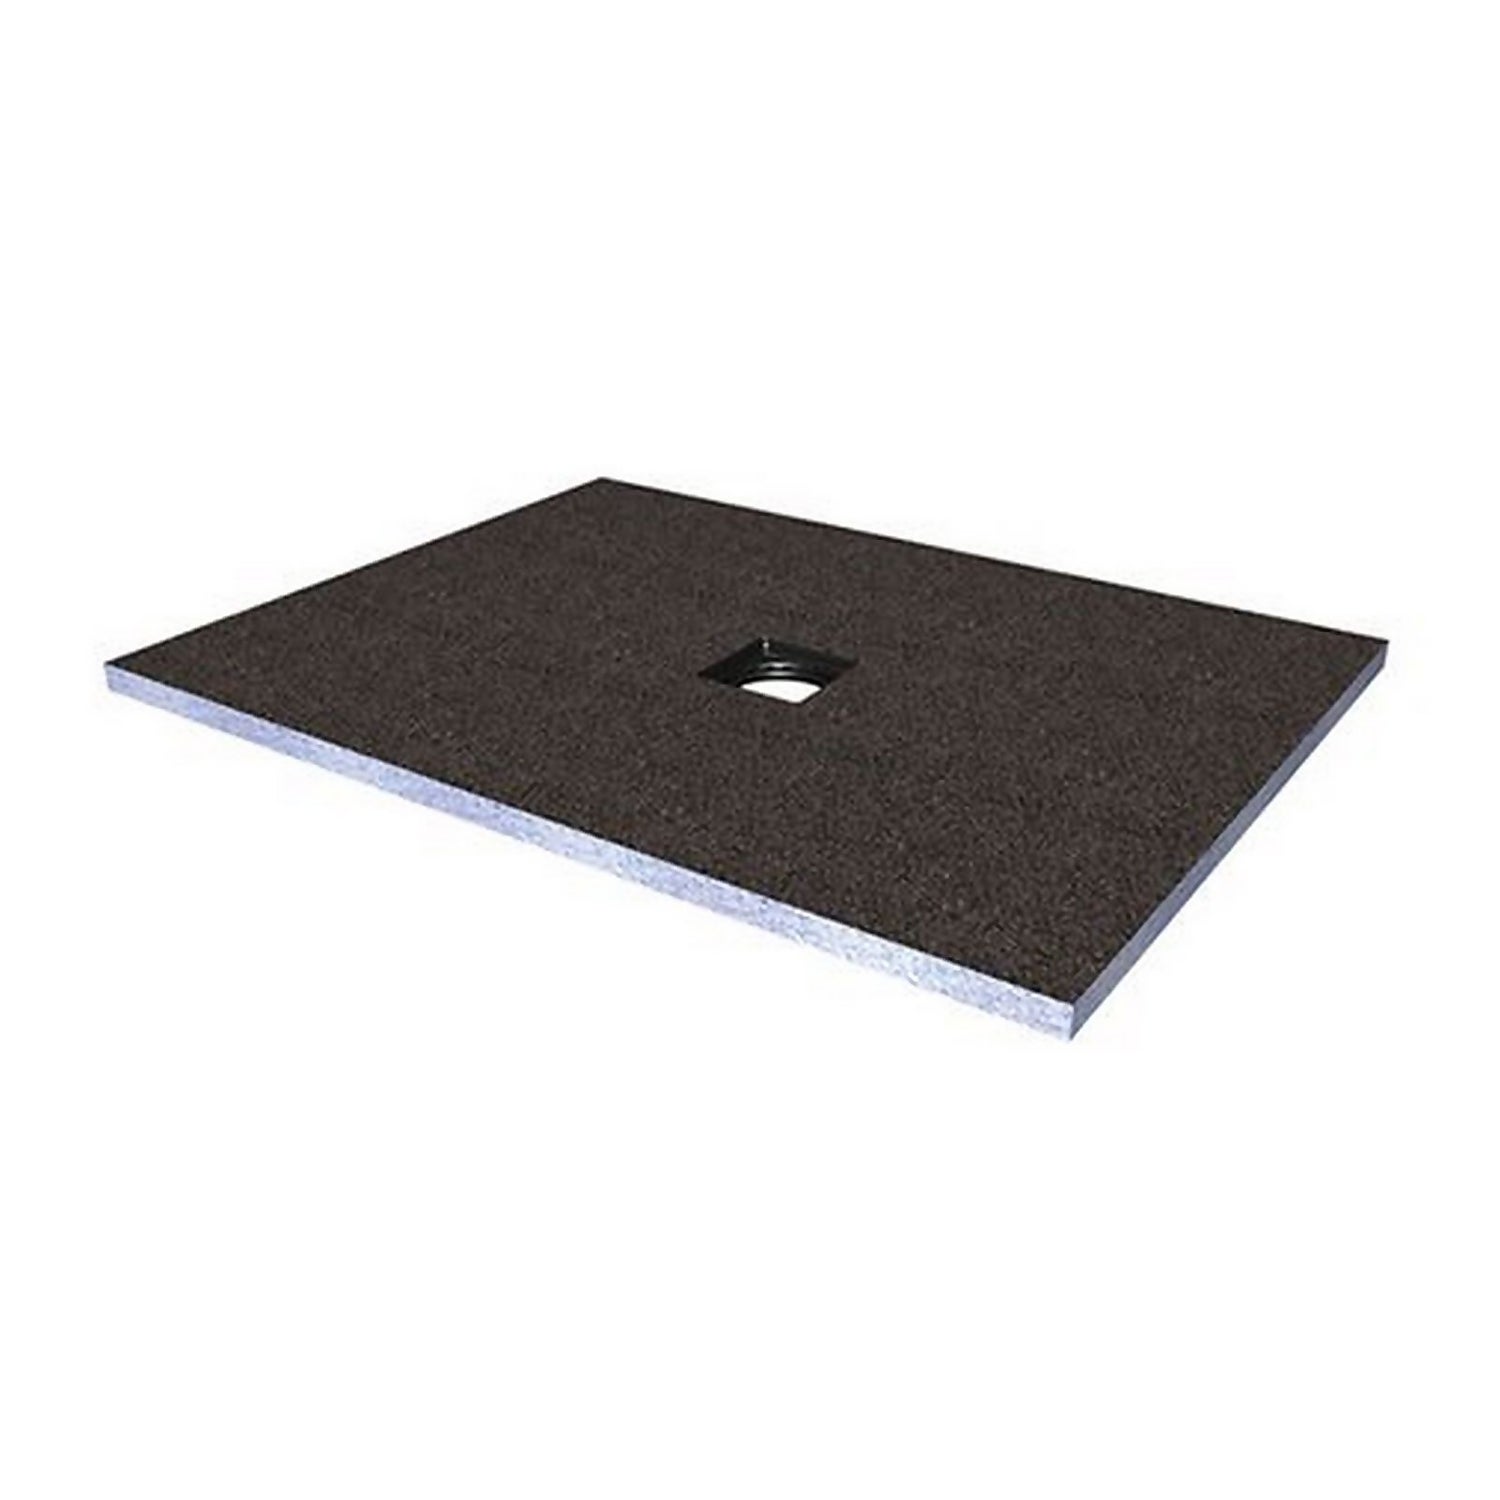 Square Centre Drain Wet room Tray 1200 x 900mm